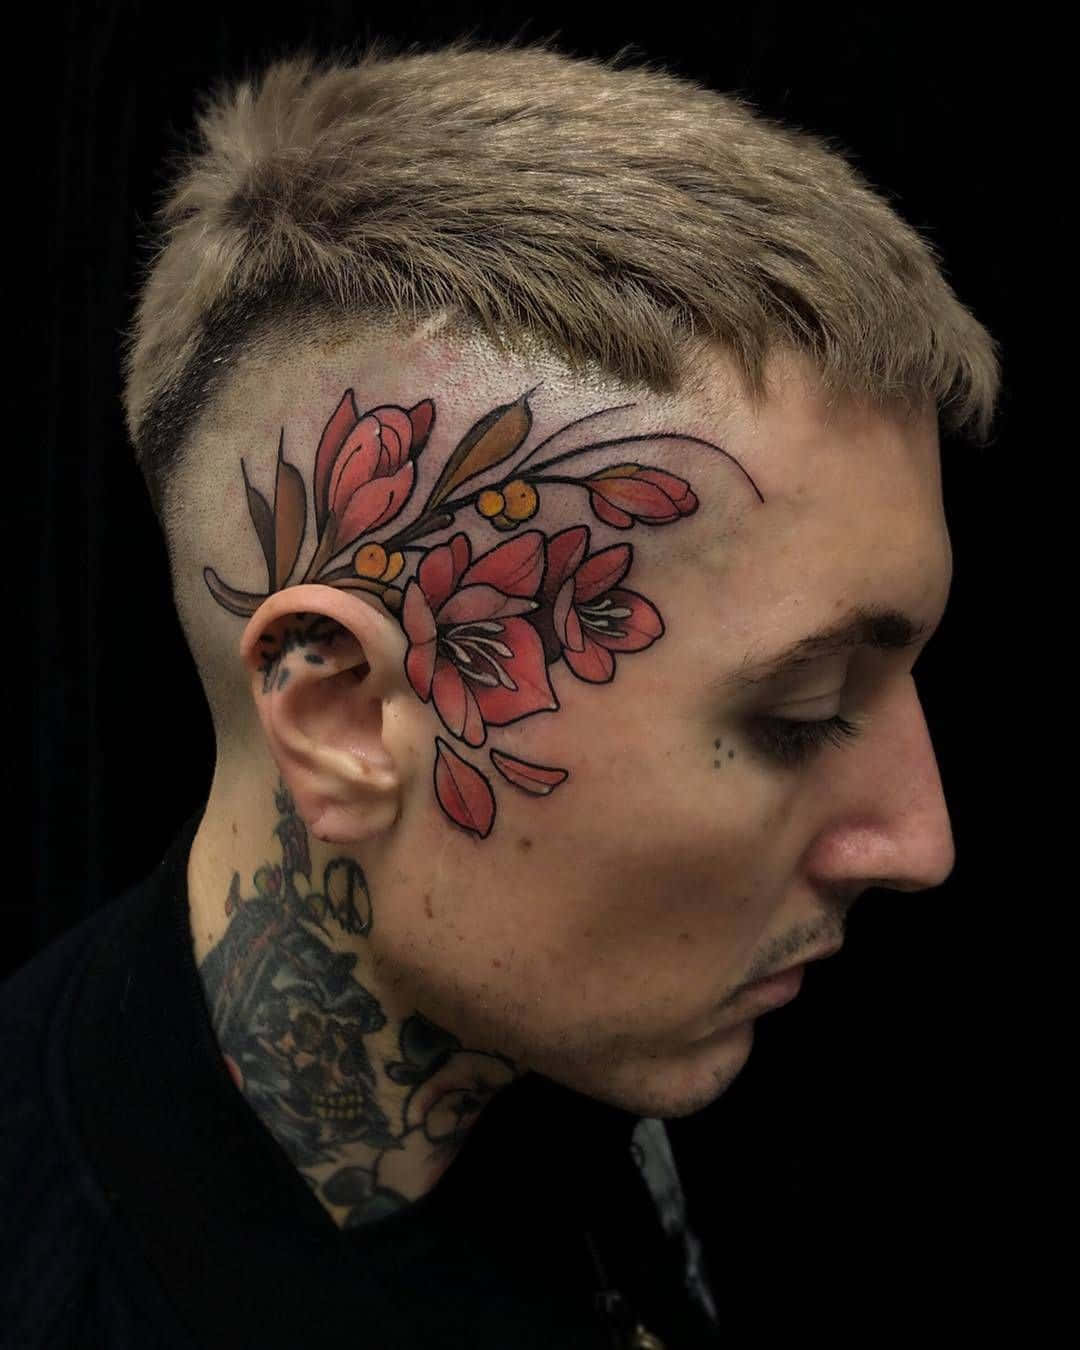 A Man With A Flower Tattoo On His Head